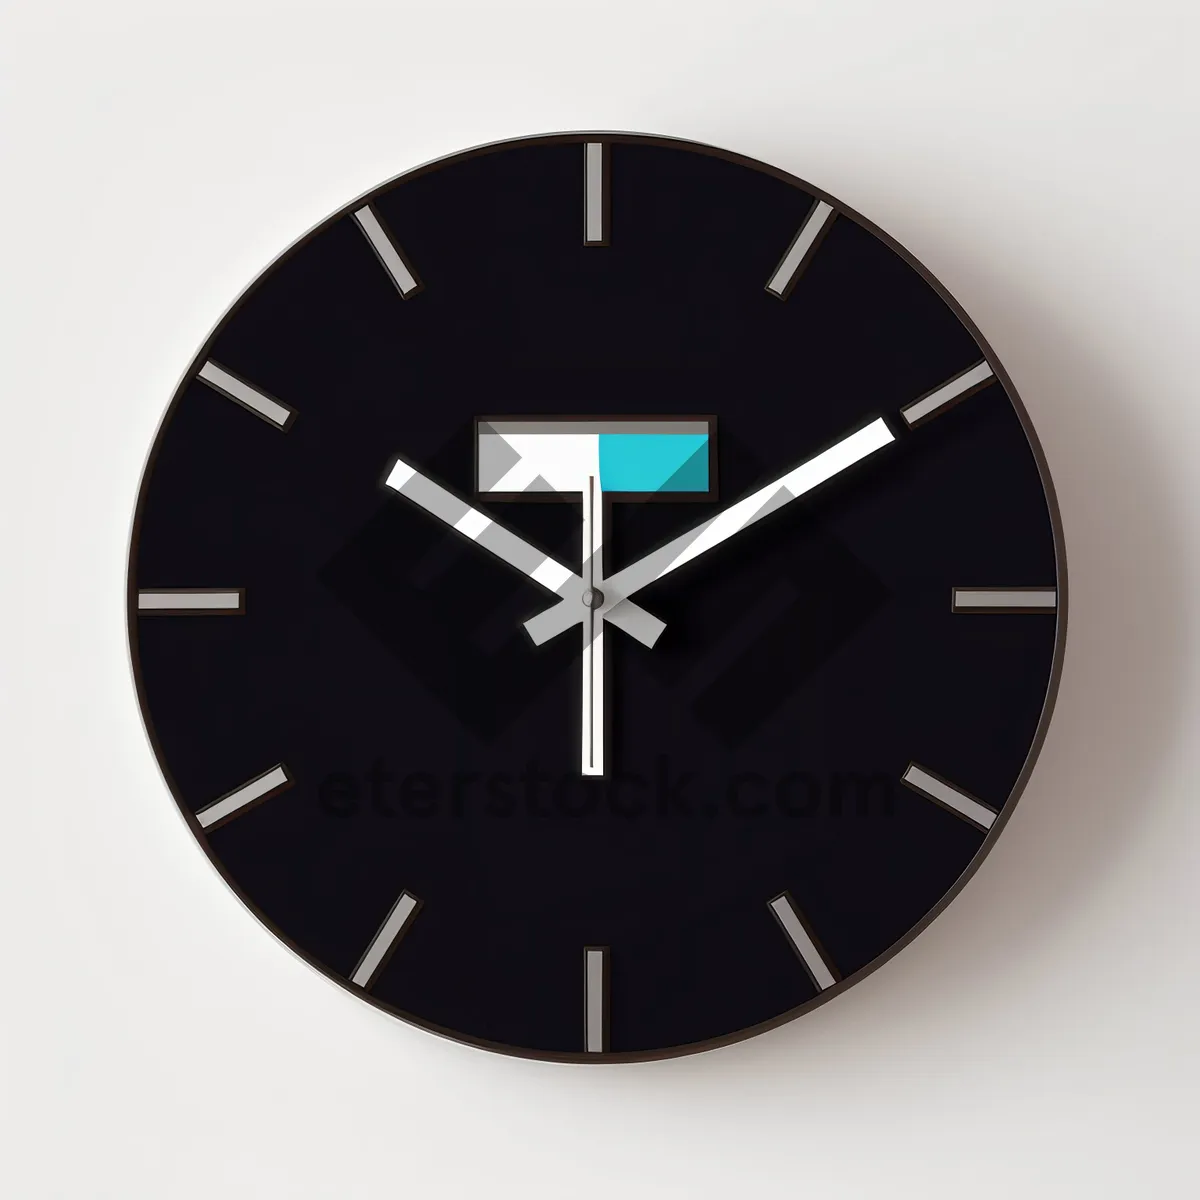 Picture of Analog Clock with Black Round Dial and Minute Hand